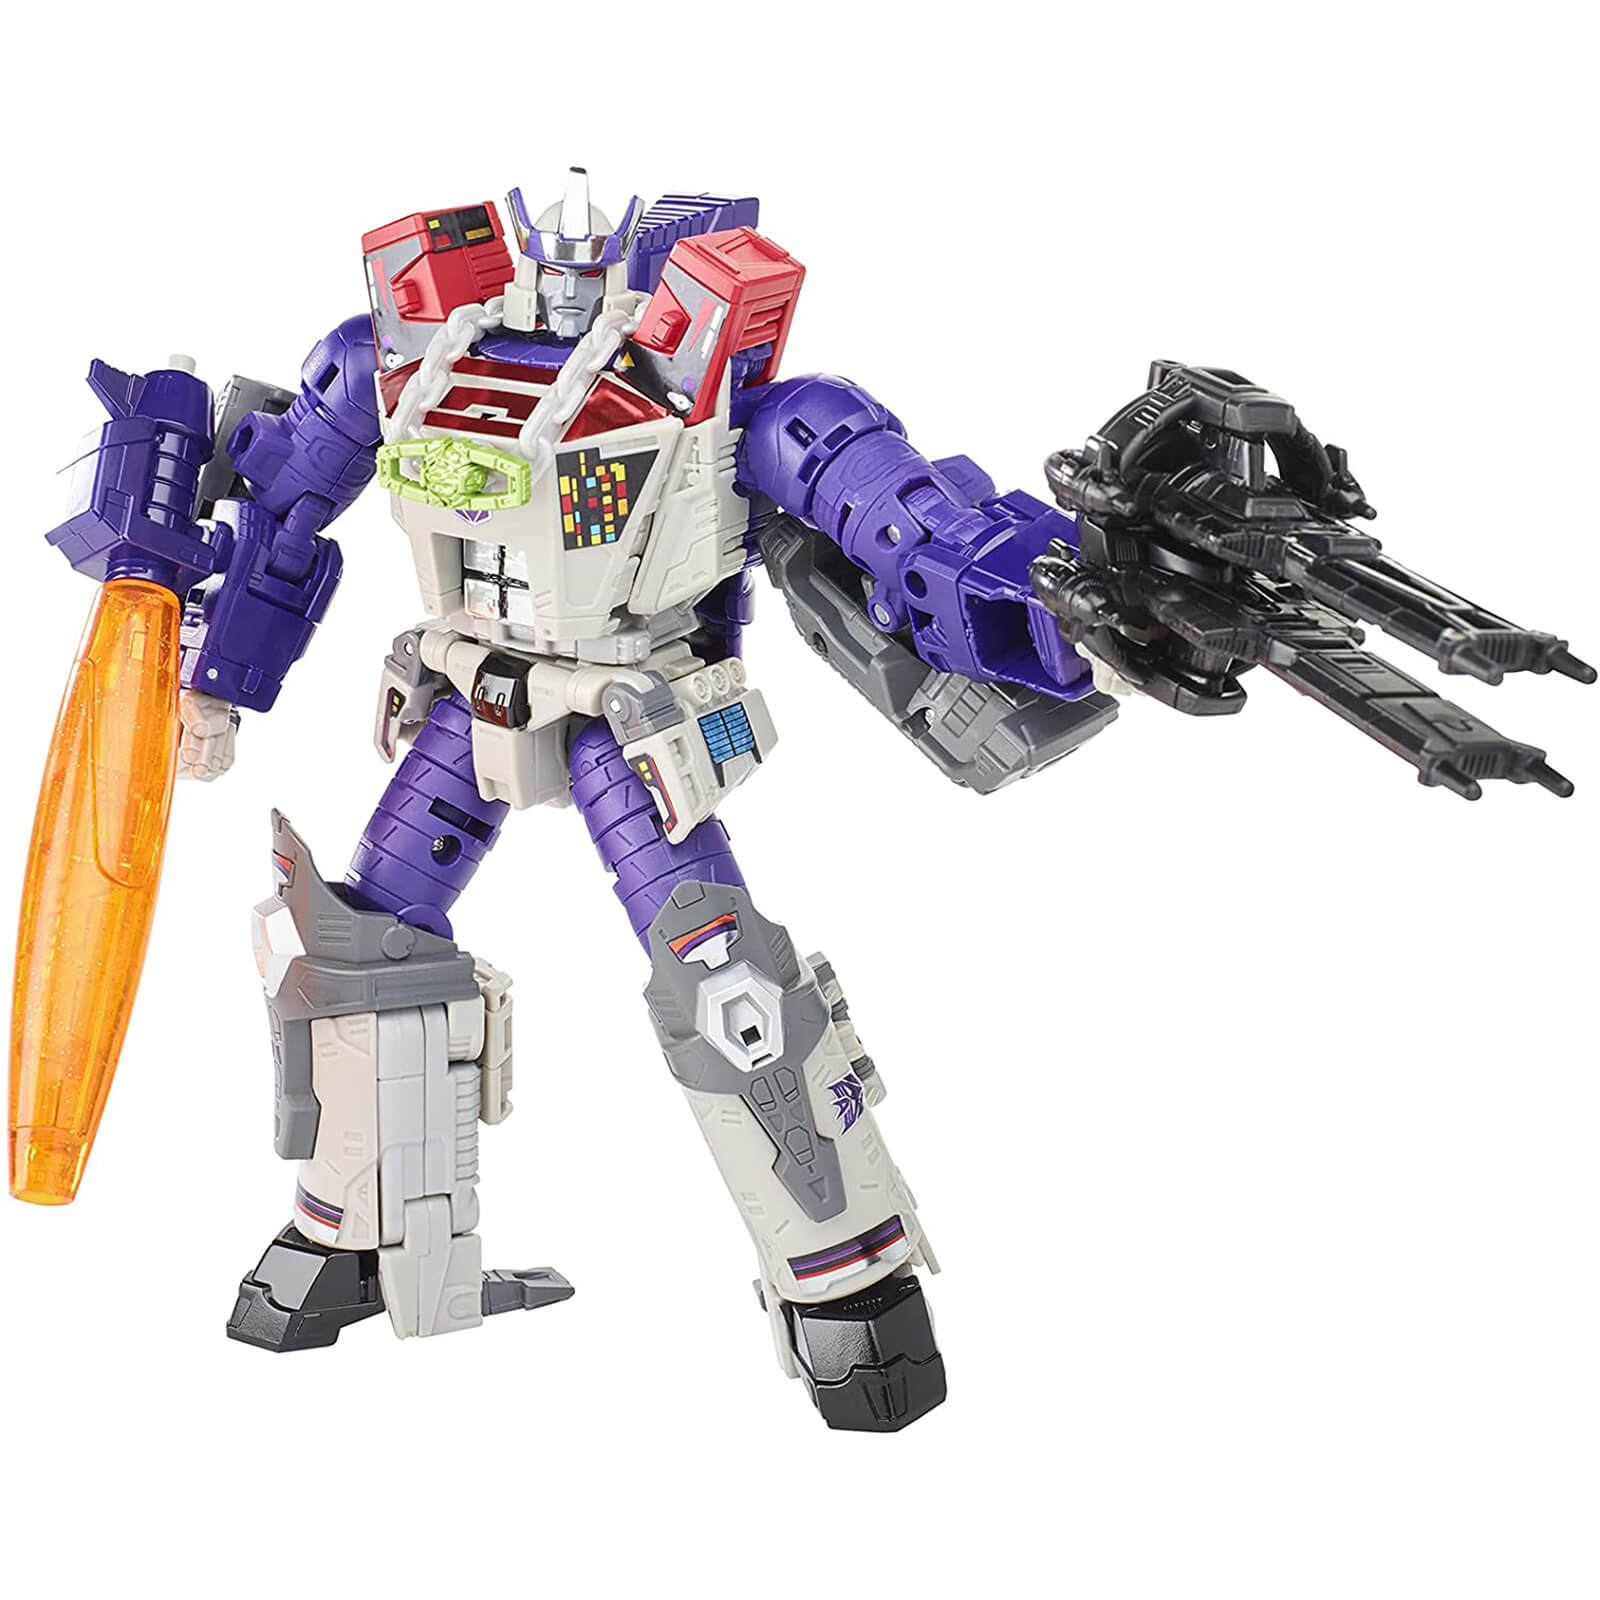 Hasbro Transformers Generations Selects 7  WFC-GS27 Galvatron Leader Class Collector Figure